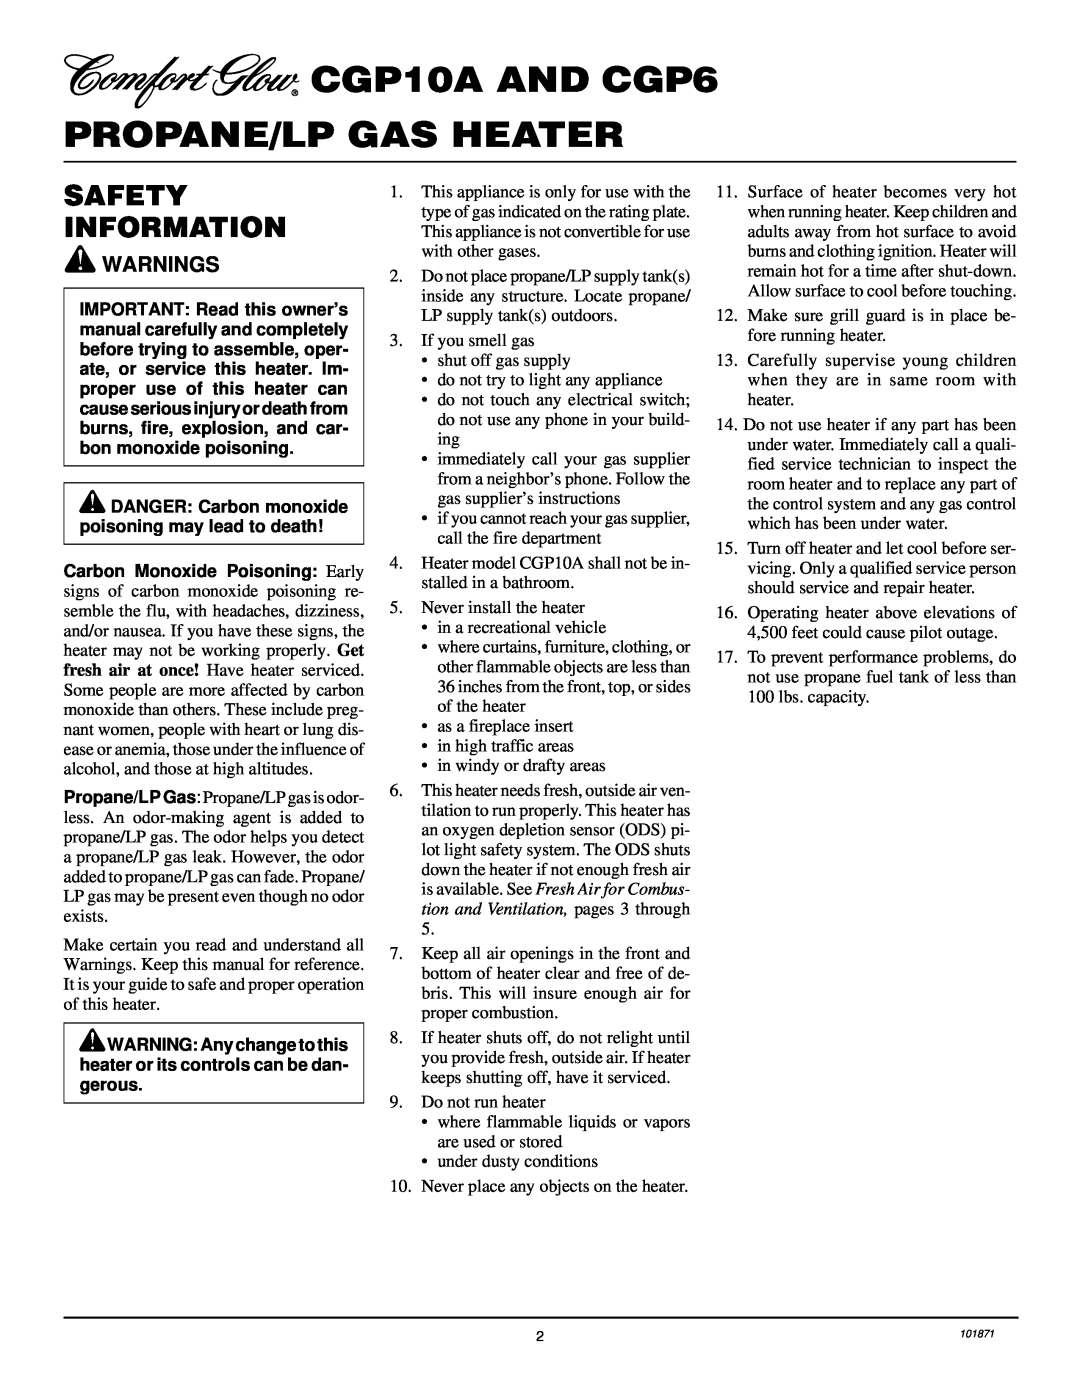 Desa installation manual CGP10A AND CGP6 PROPANE/LP GAS HEATER, Safety Information, Warnings 